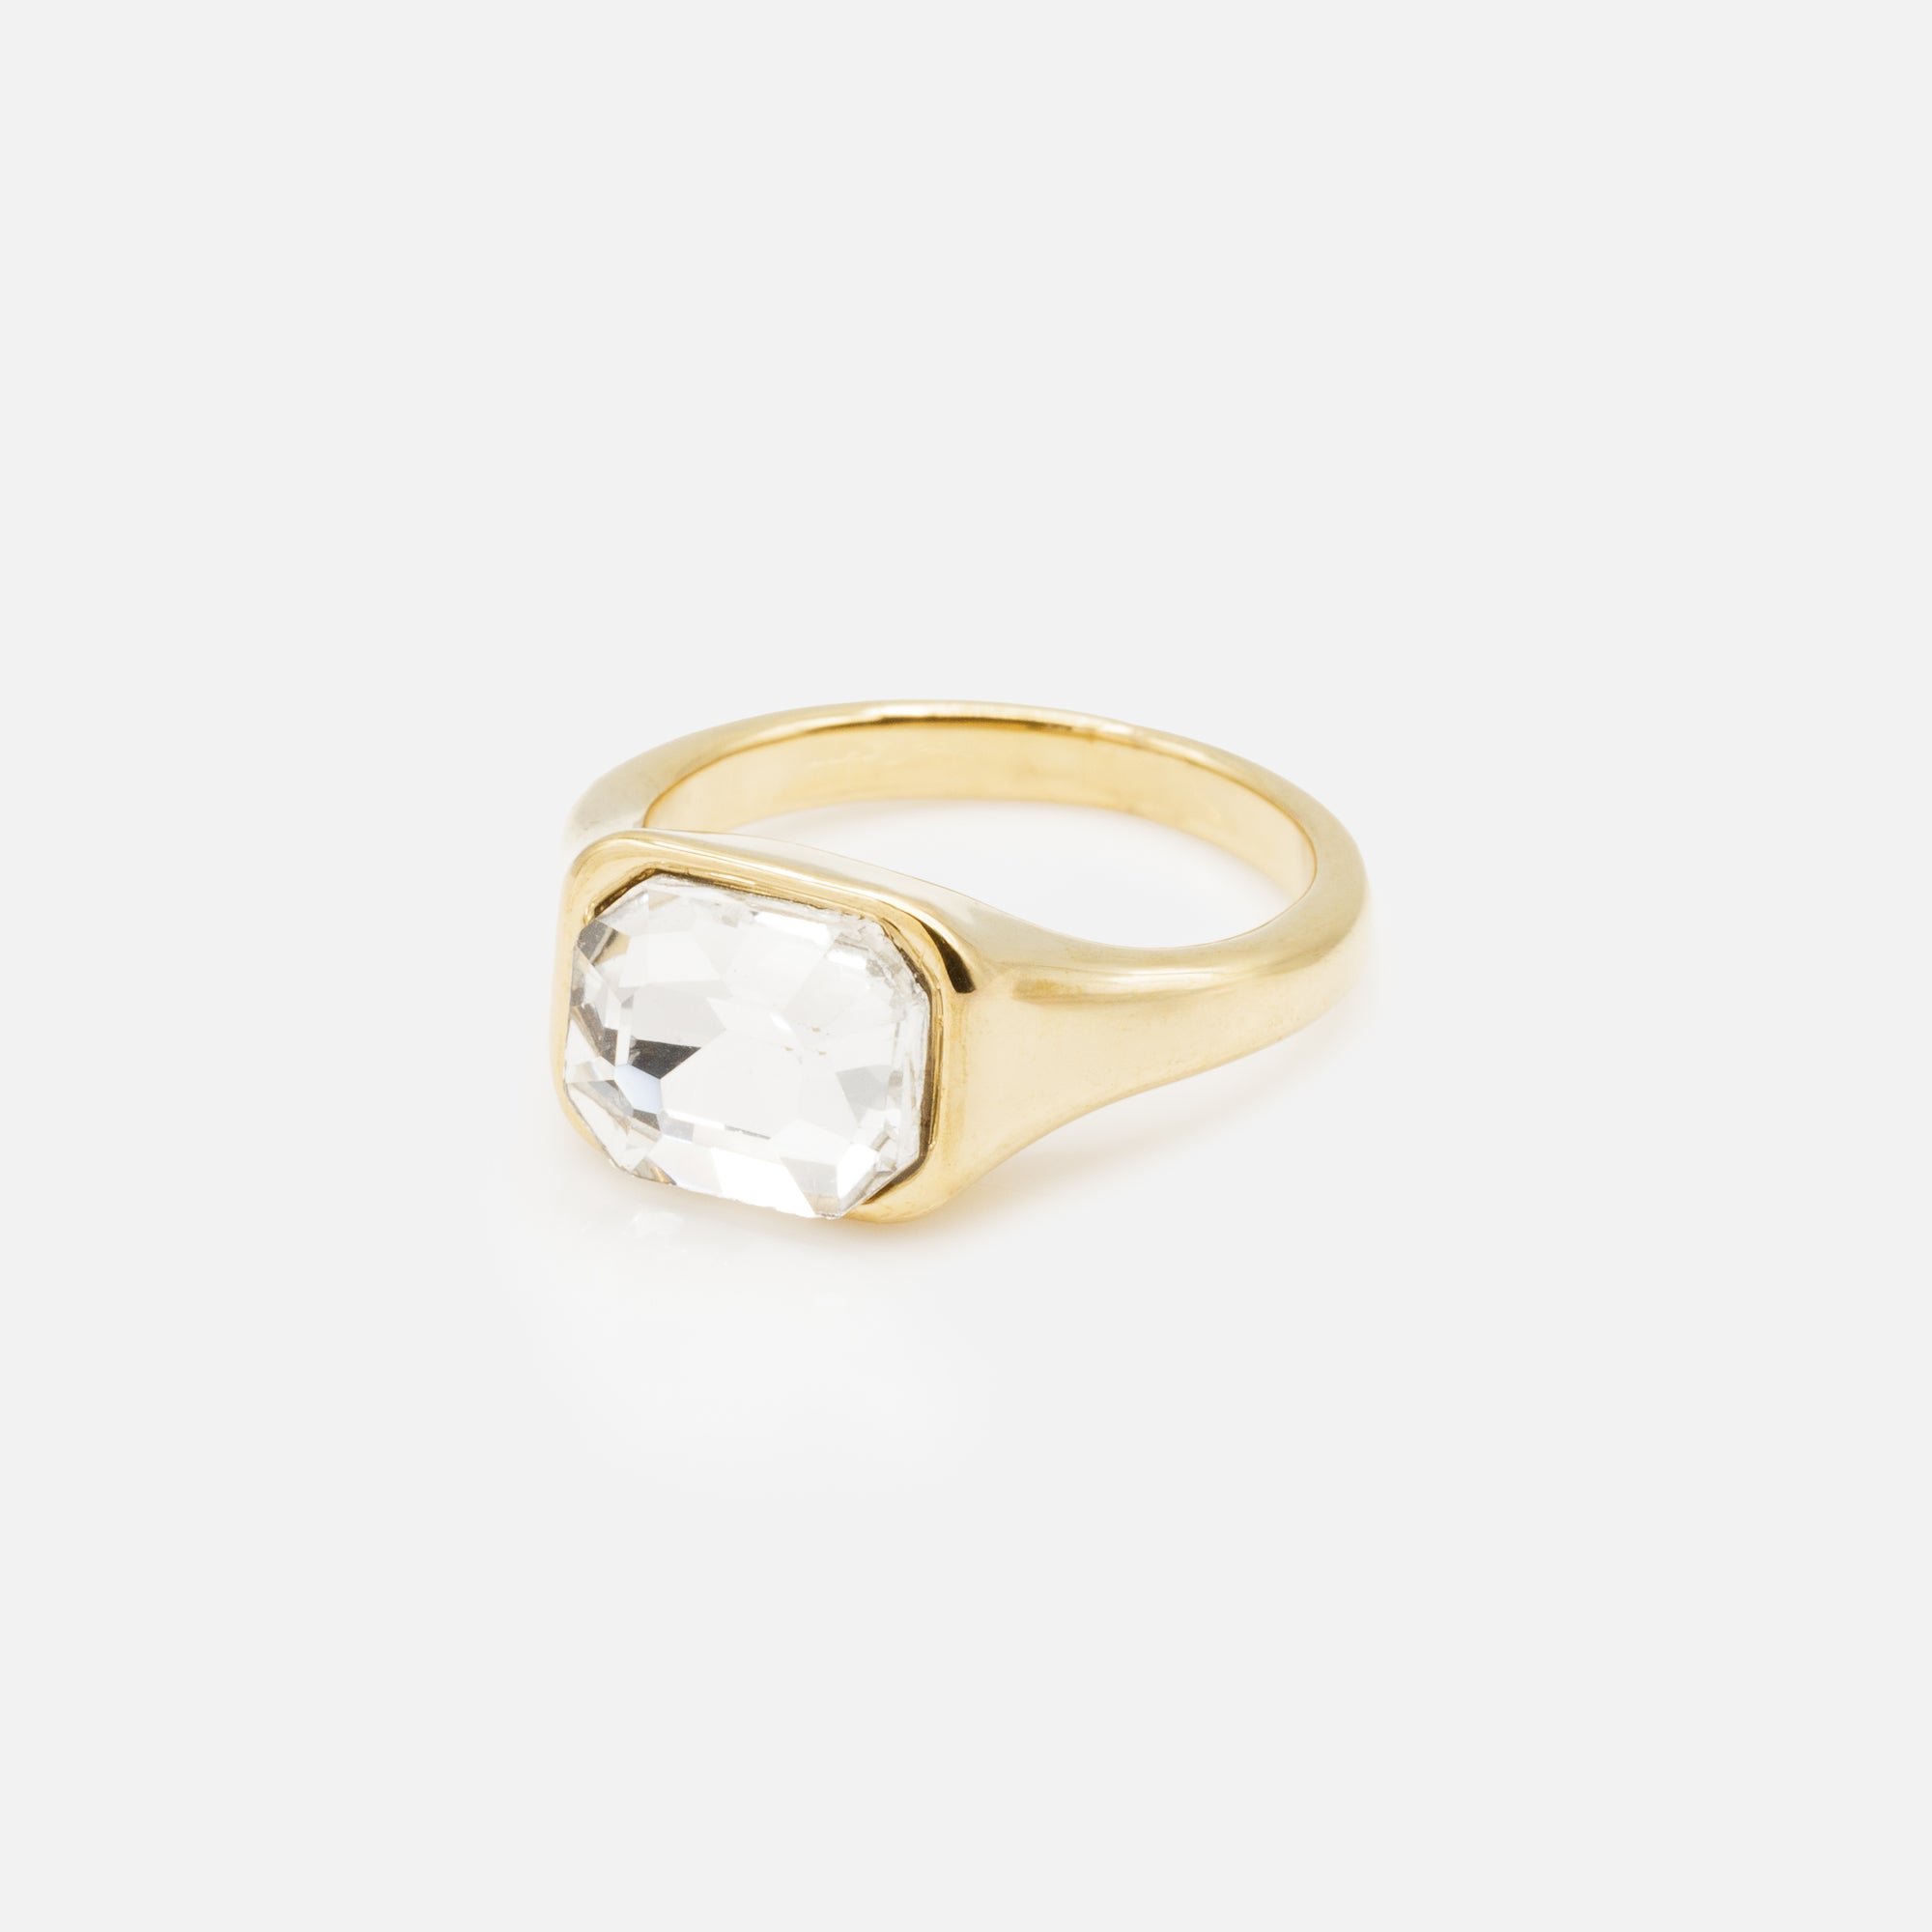 Gold ring with large cubic zirconia in stainless steel